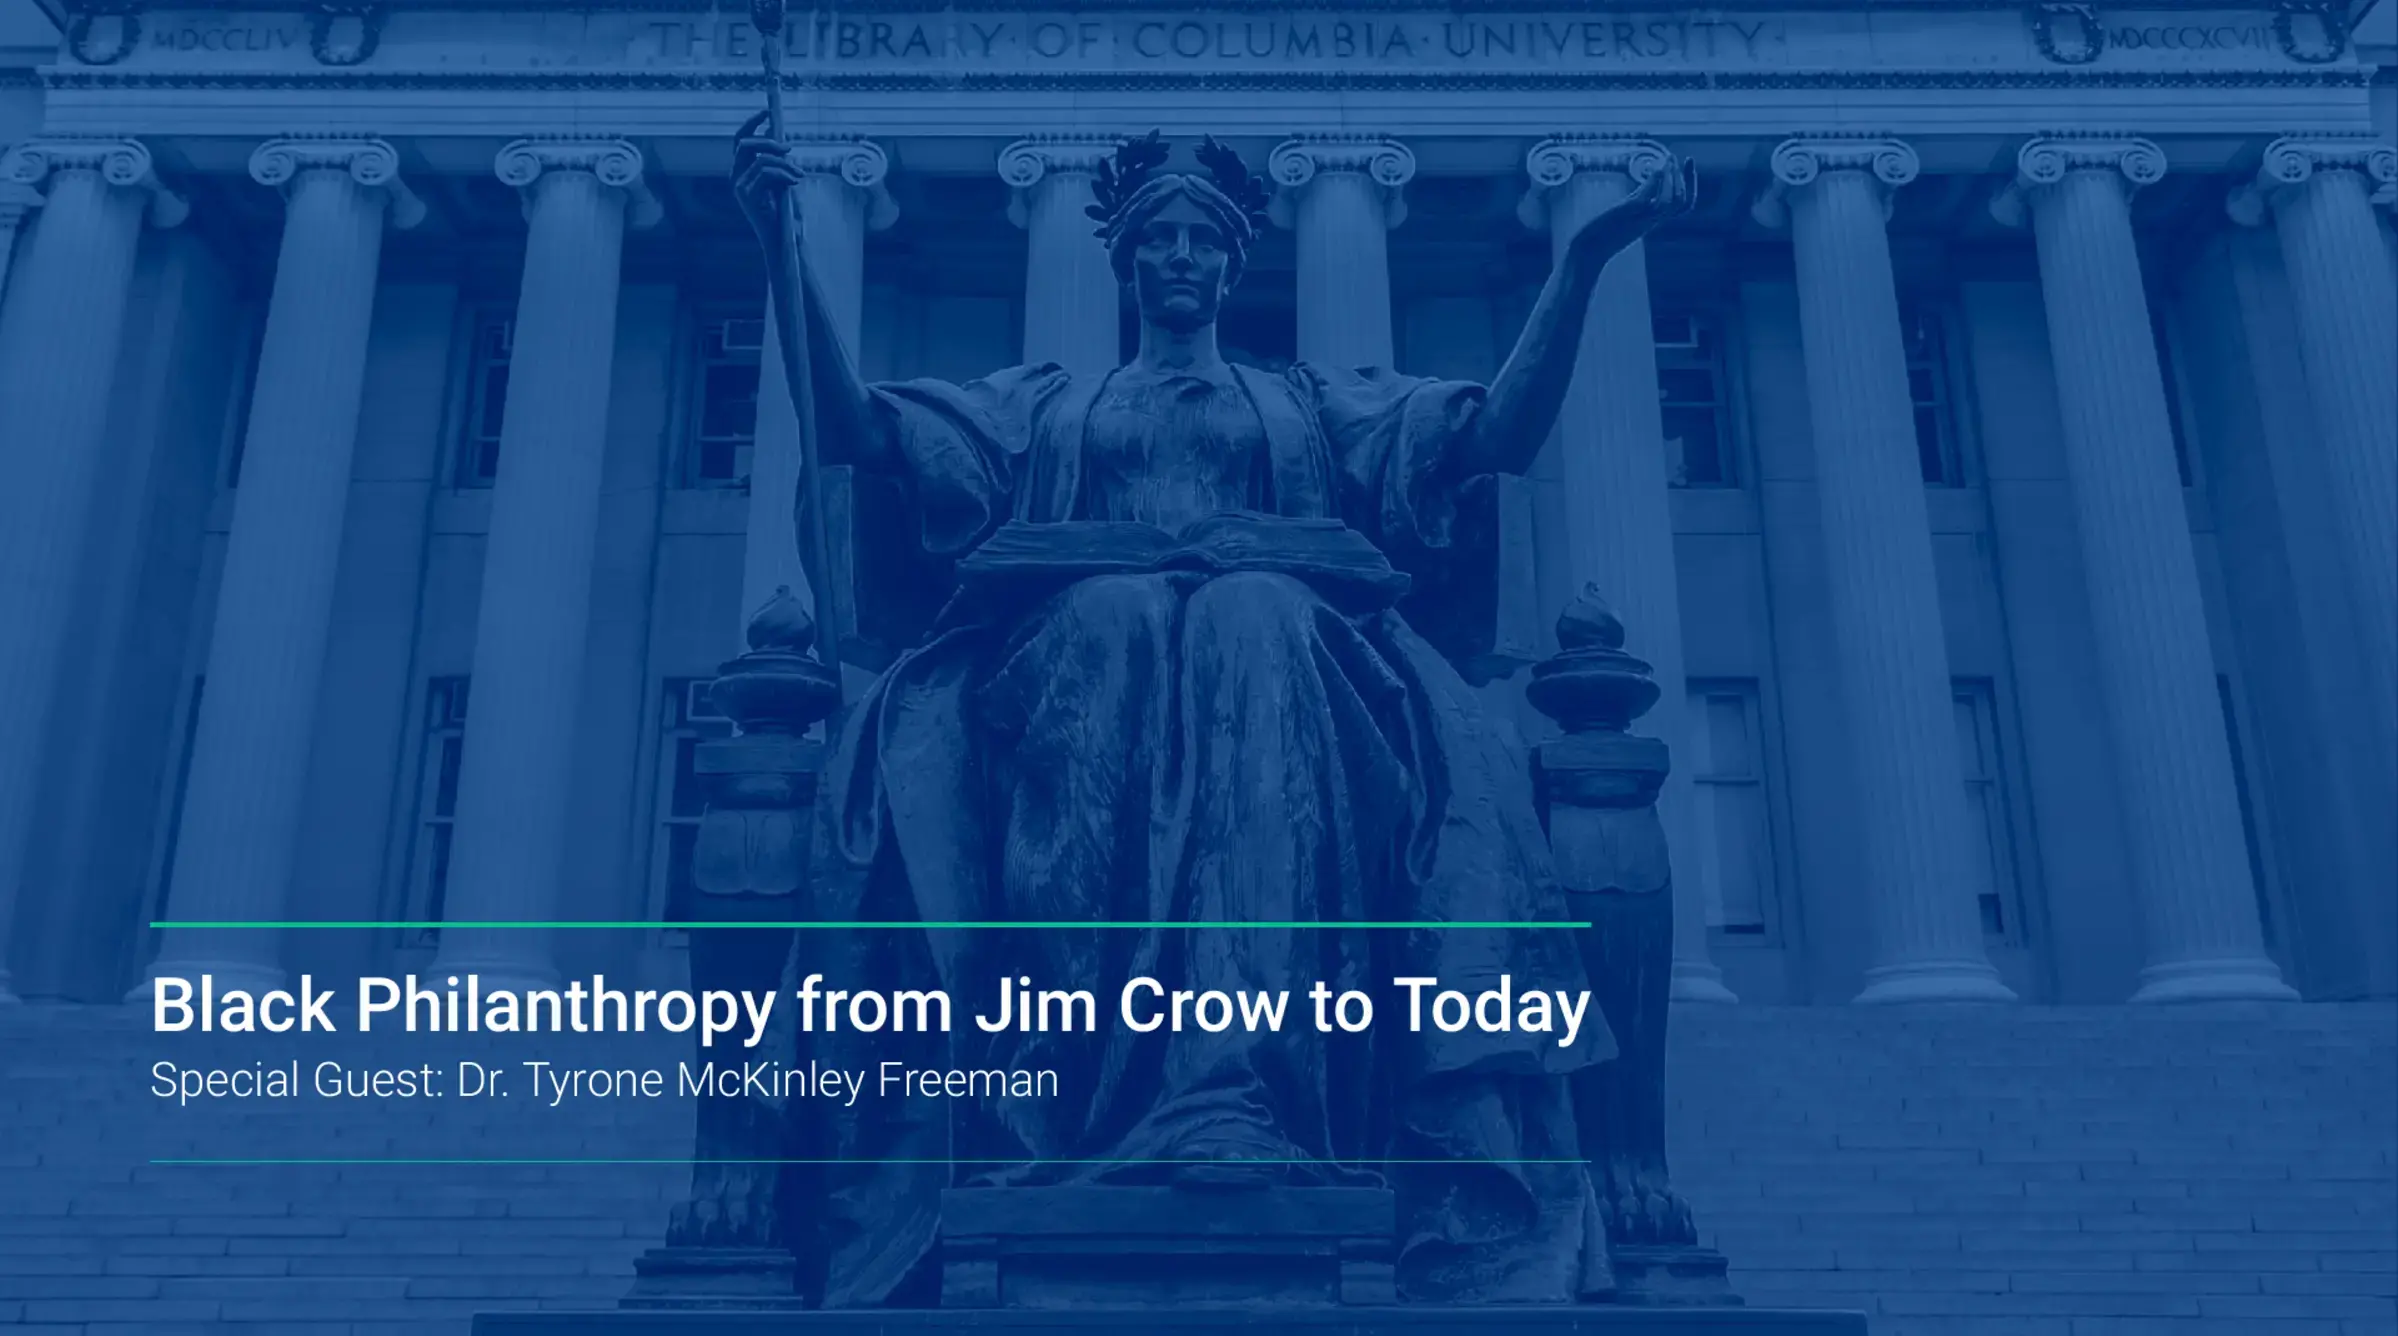 Video of Black Philanthropy from Jim Crow to Today